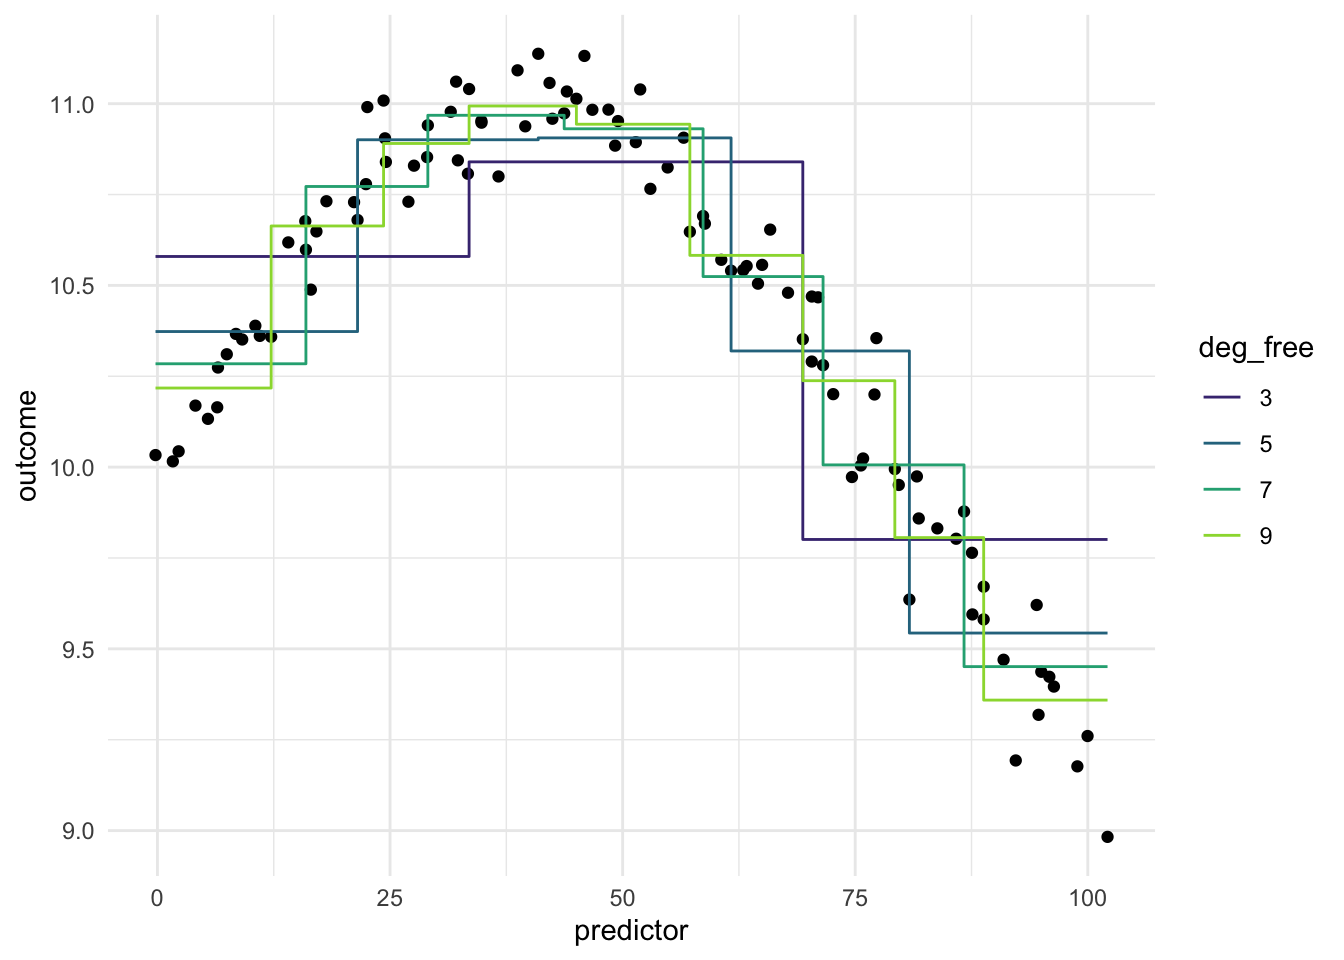 Scatter chart. Predictor along the x-axis and outcome along the y-axis. The data has some wiggliness to it, but it follows a curve. You would not be able to fit a straight line to this data.